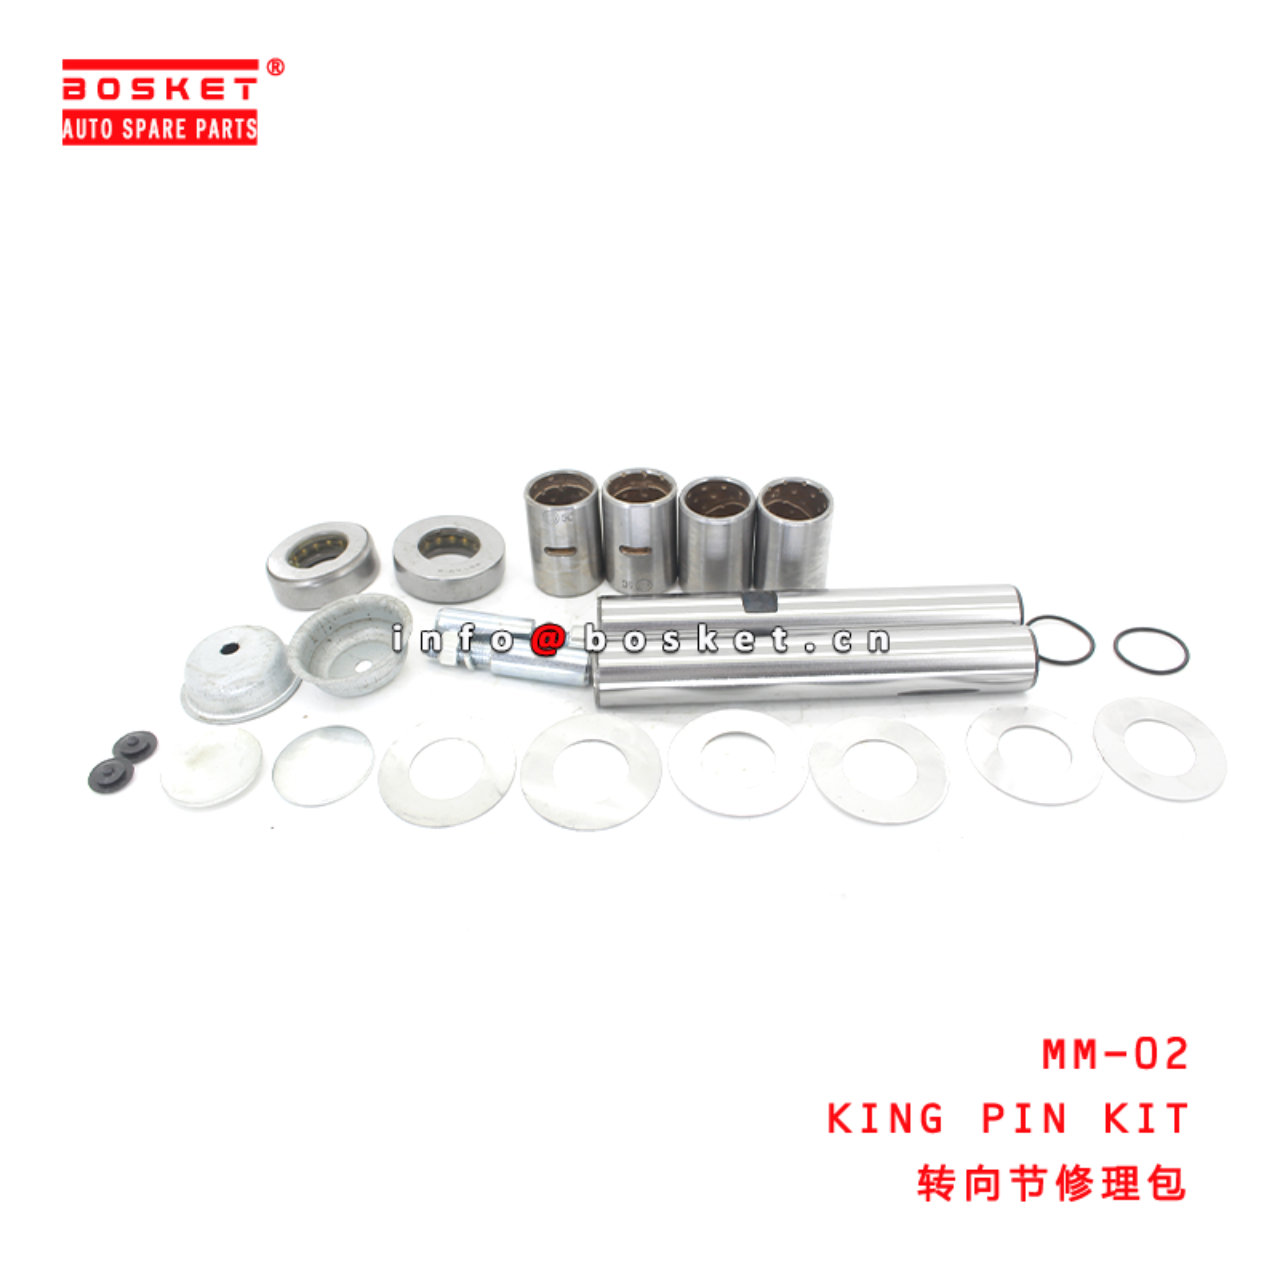 MM-02 King Pin Kit Suitable for ISUZU